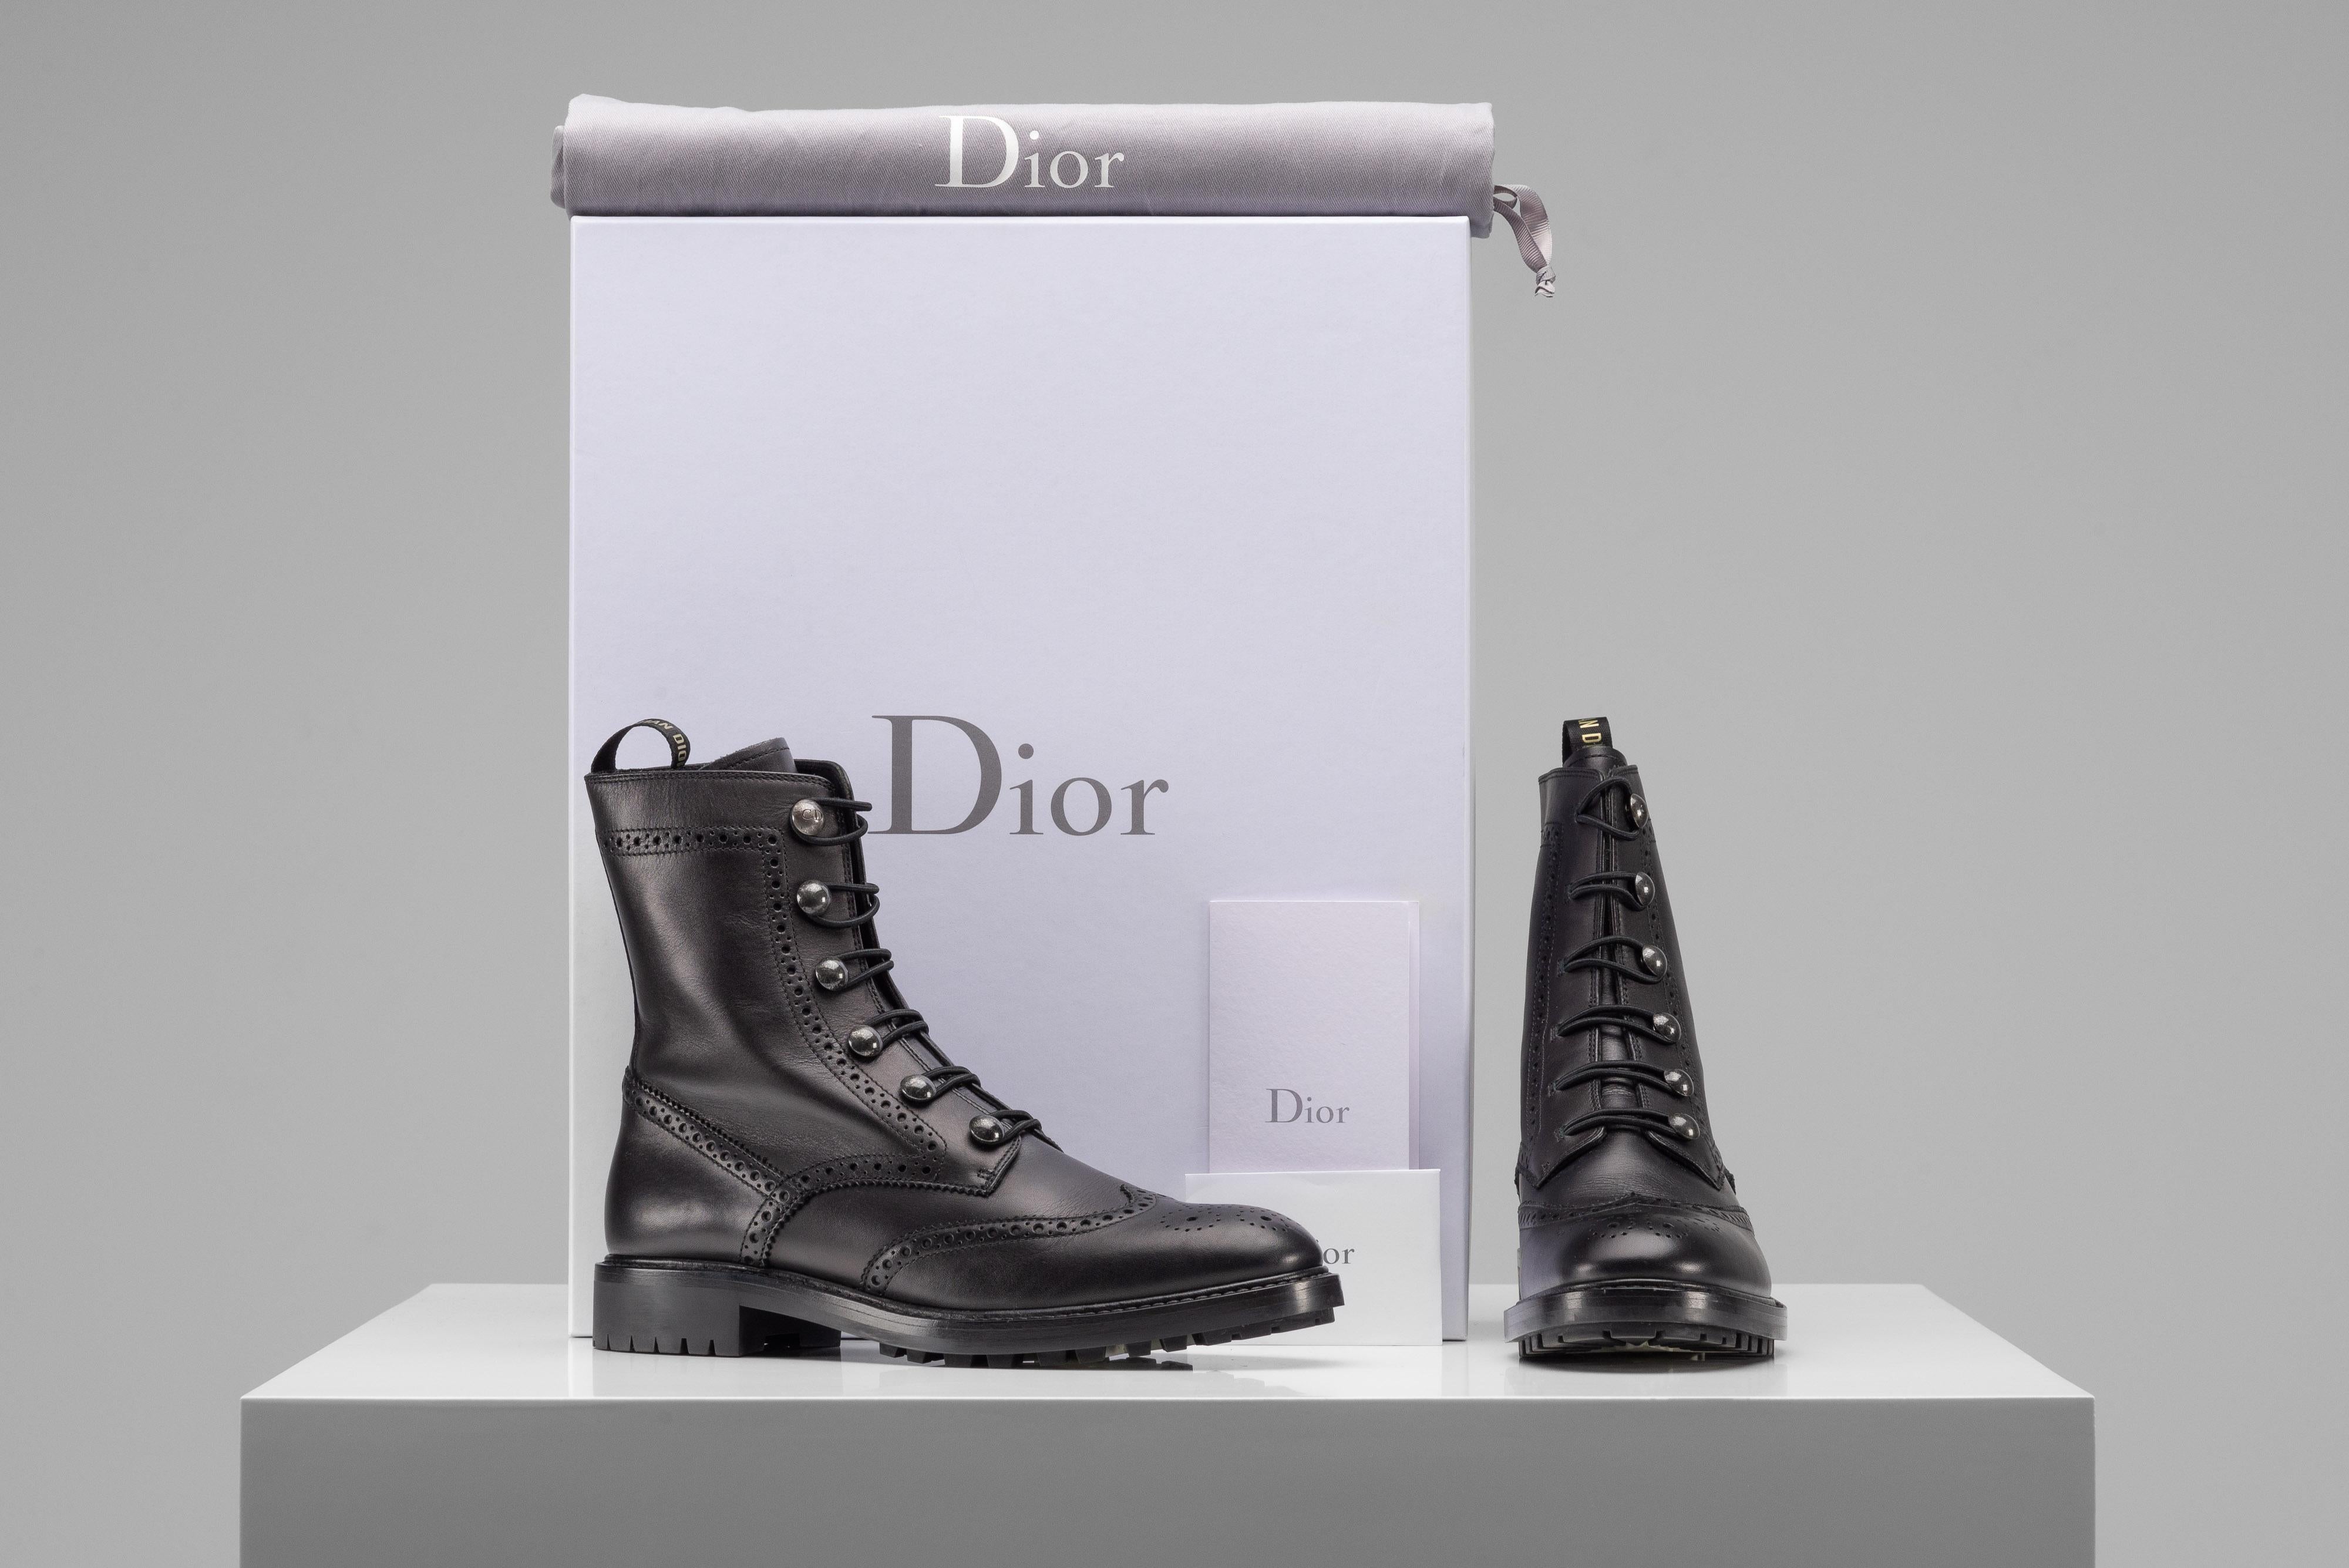 From the collection of SAVINETI we offer these Dior Leather Combat Boots:
-    Brand: Christian Dior
-    Model: Leather Combat Boots
-    Color: Black
-    Size: 40
-    Condition: Very Good Condition
-    Extras: Dior box

Authenticity is our core